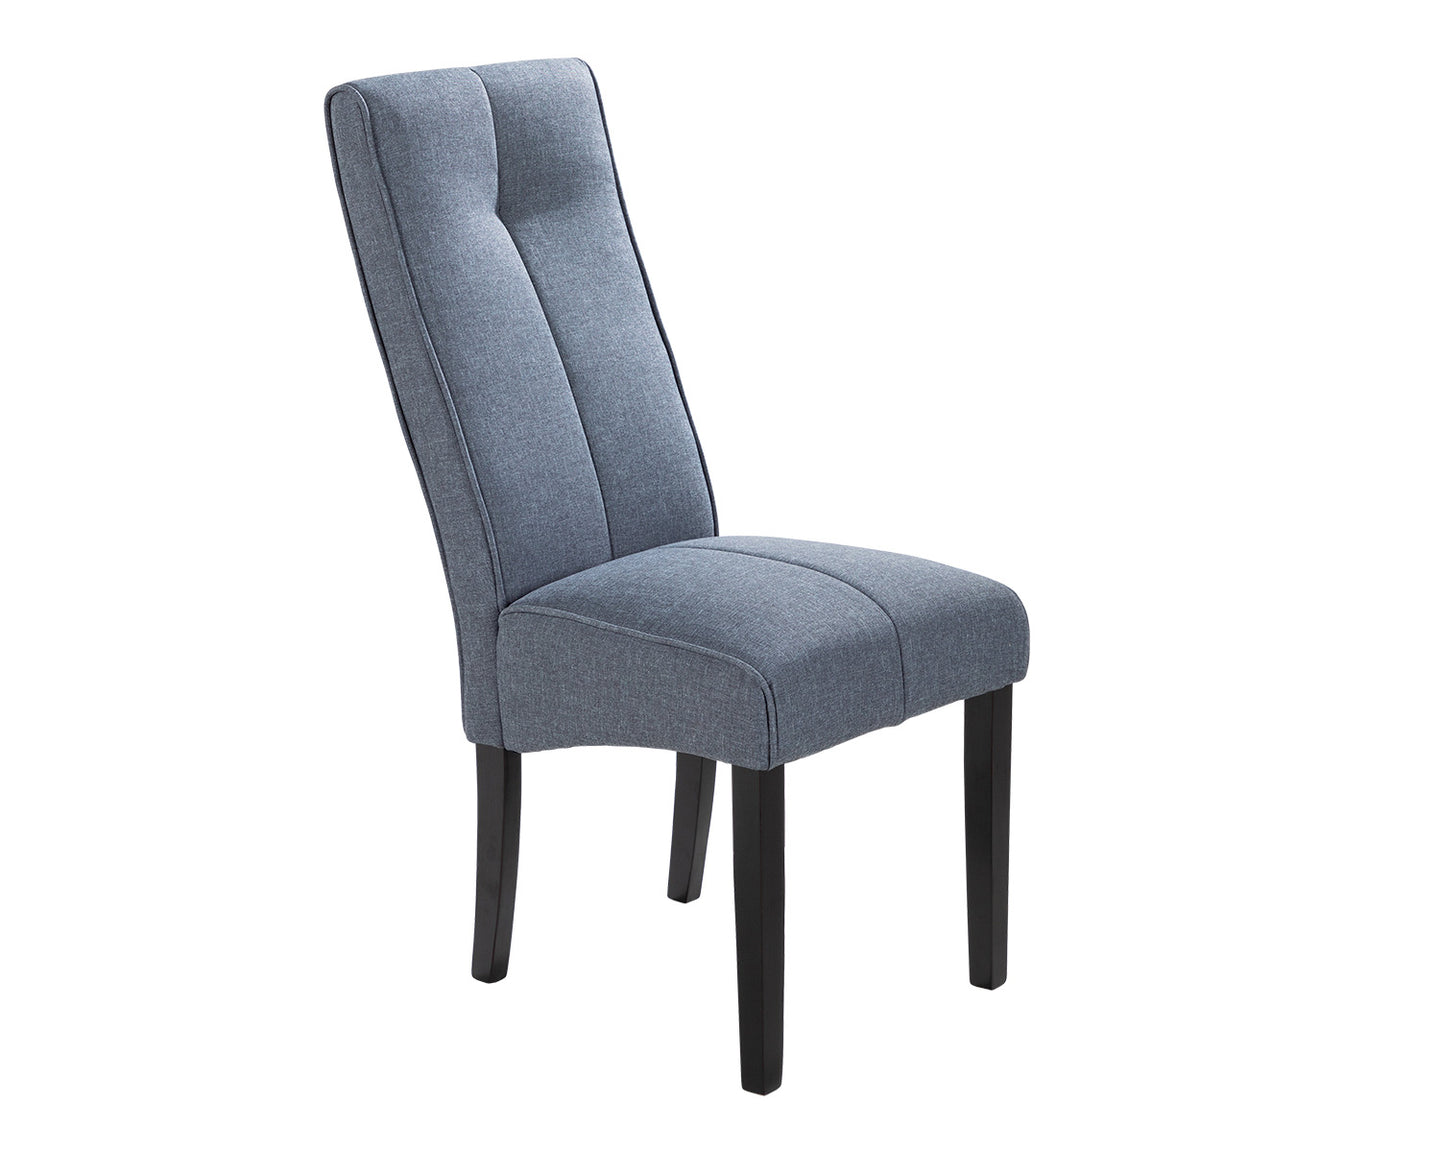 Vienna Dining Chair in Grey Linen with Black Legs